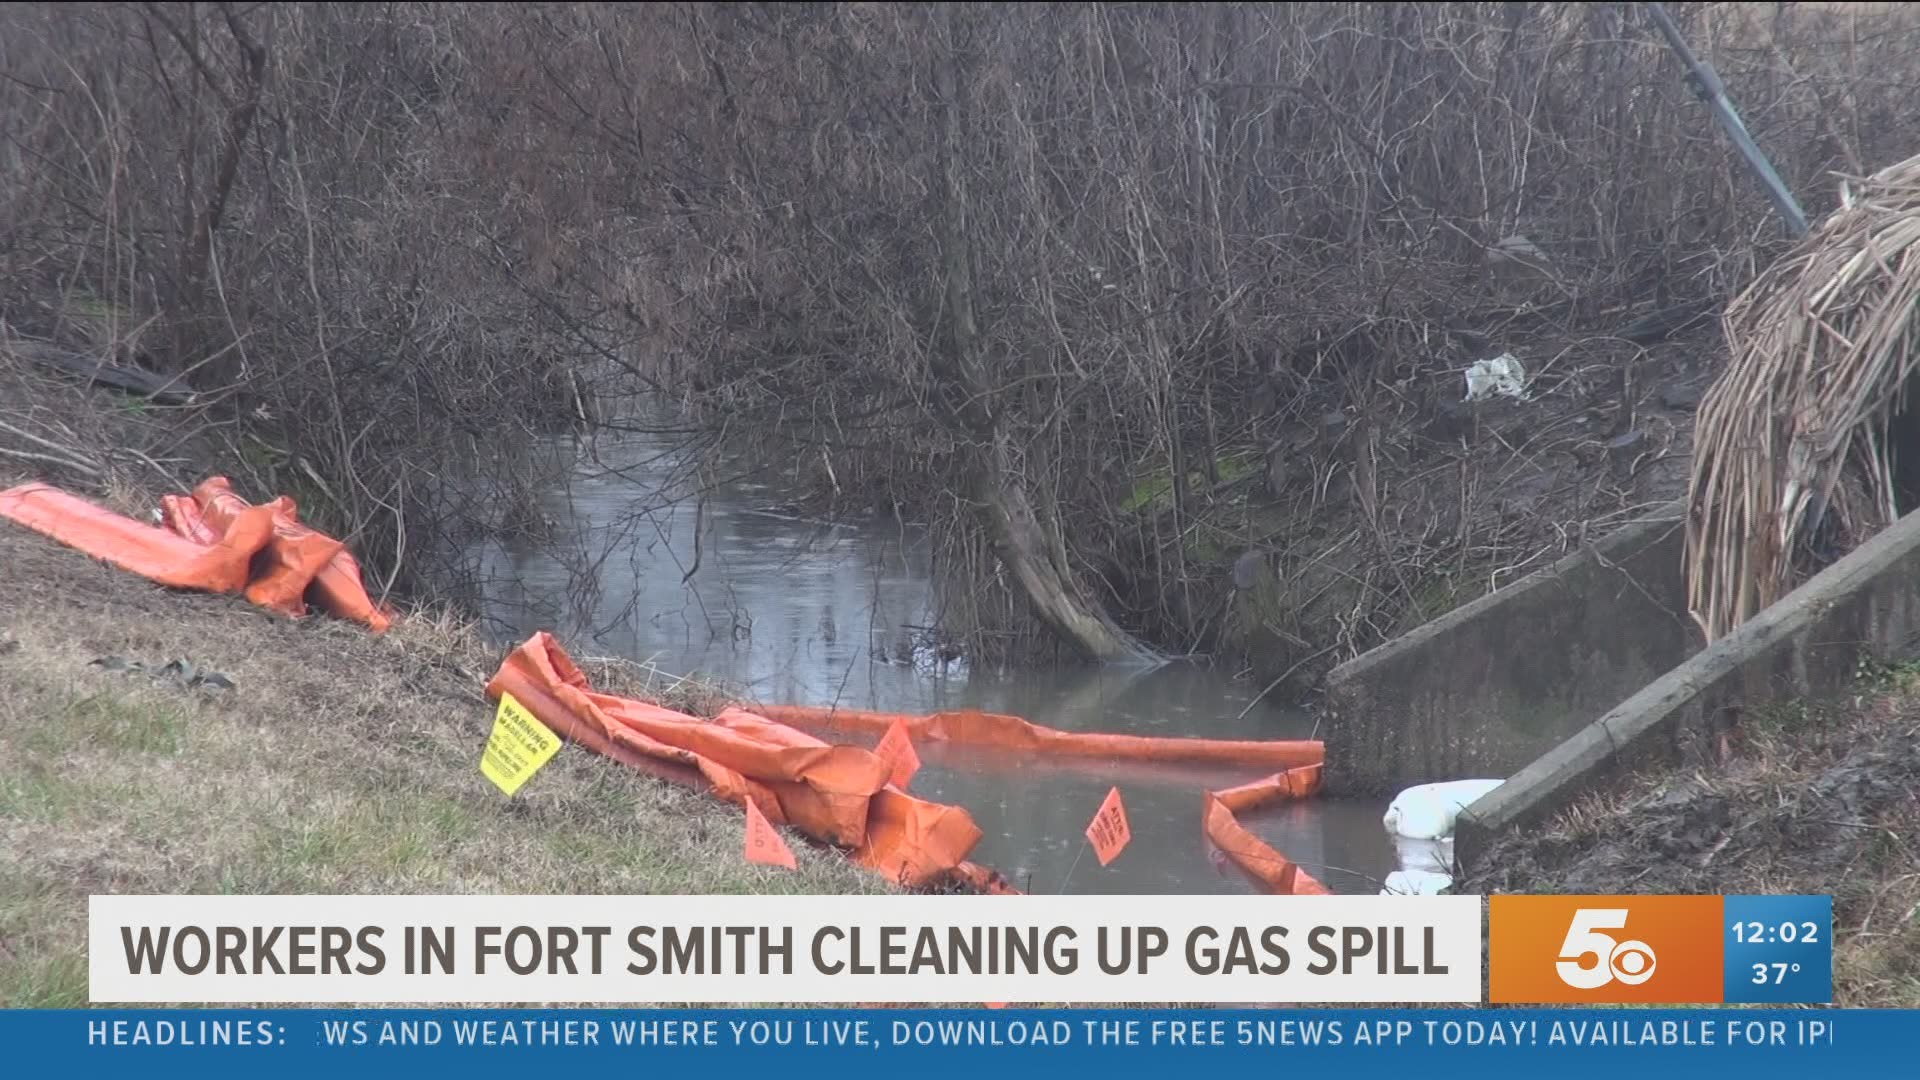 The spill did get into the storm drainage area, but it did not breach any drinking water supplies.